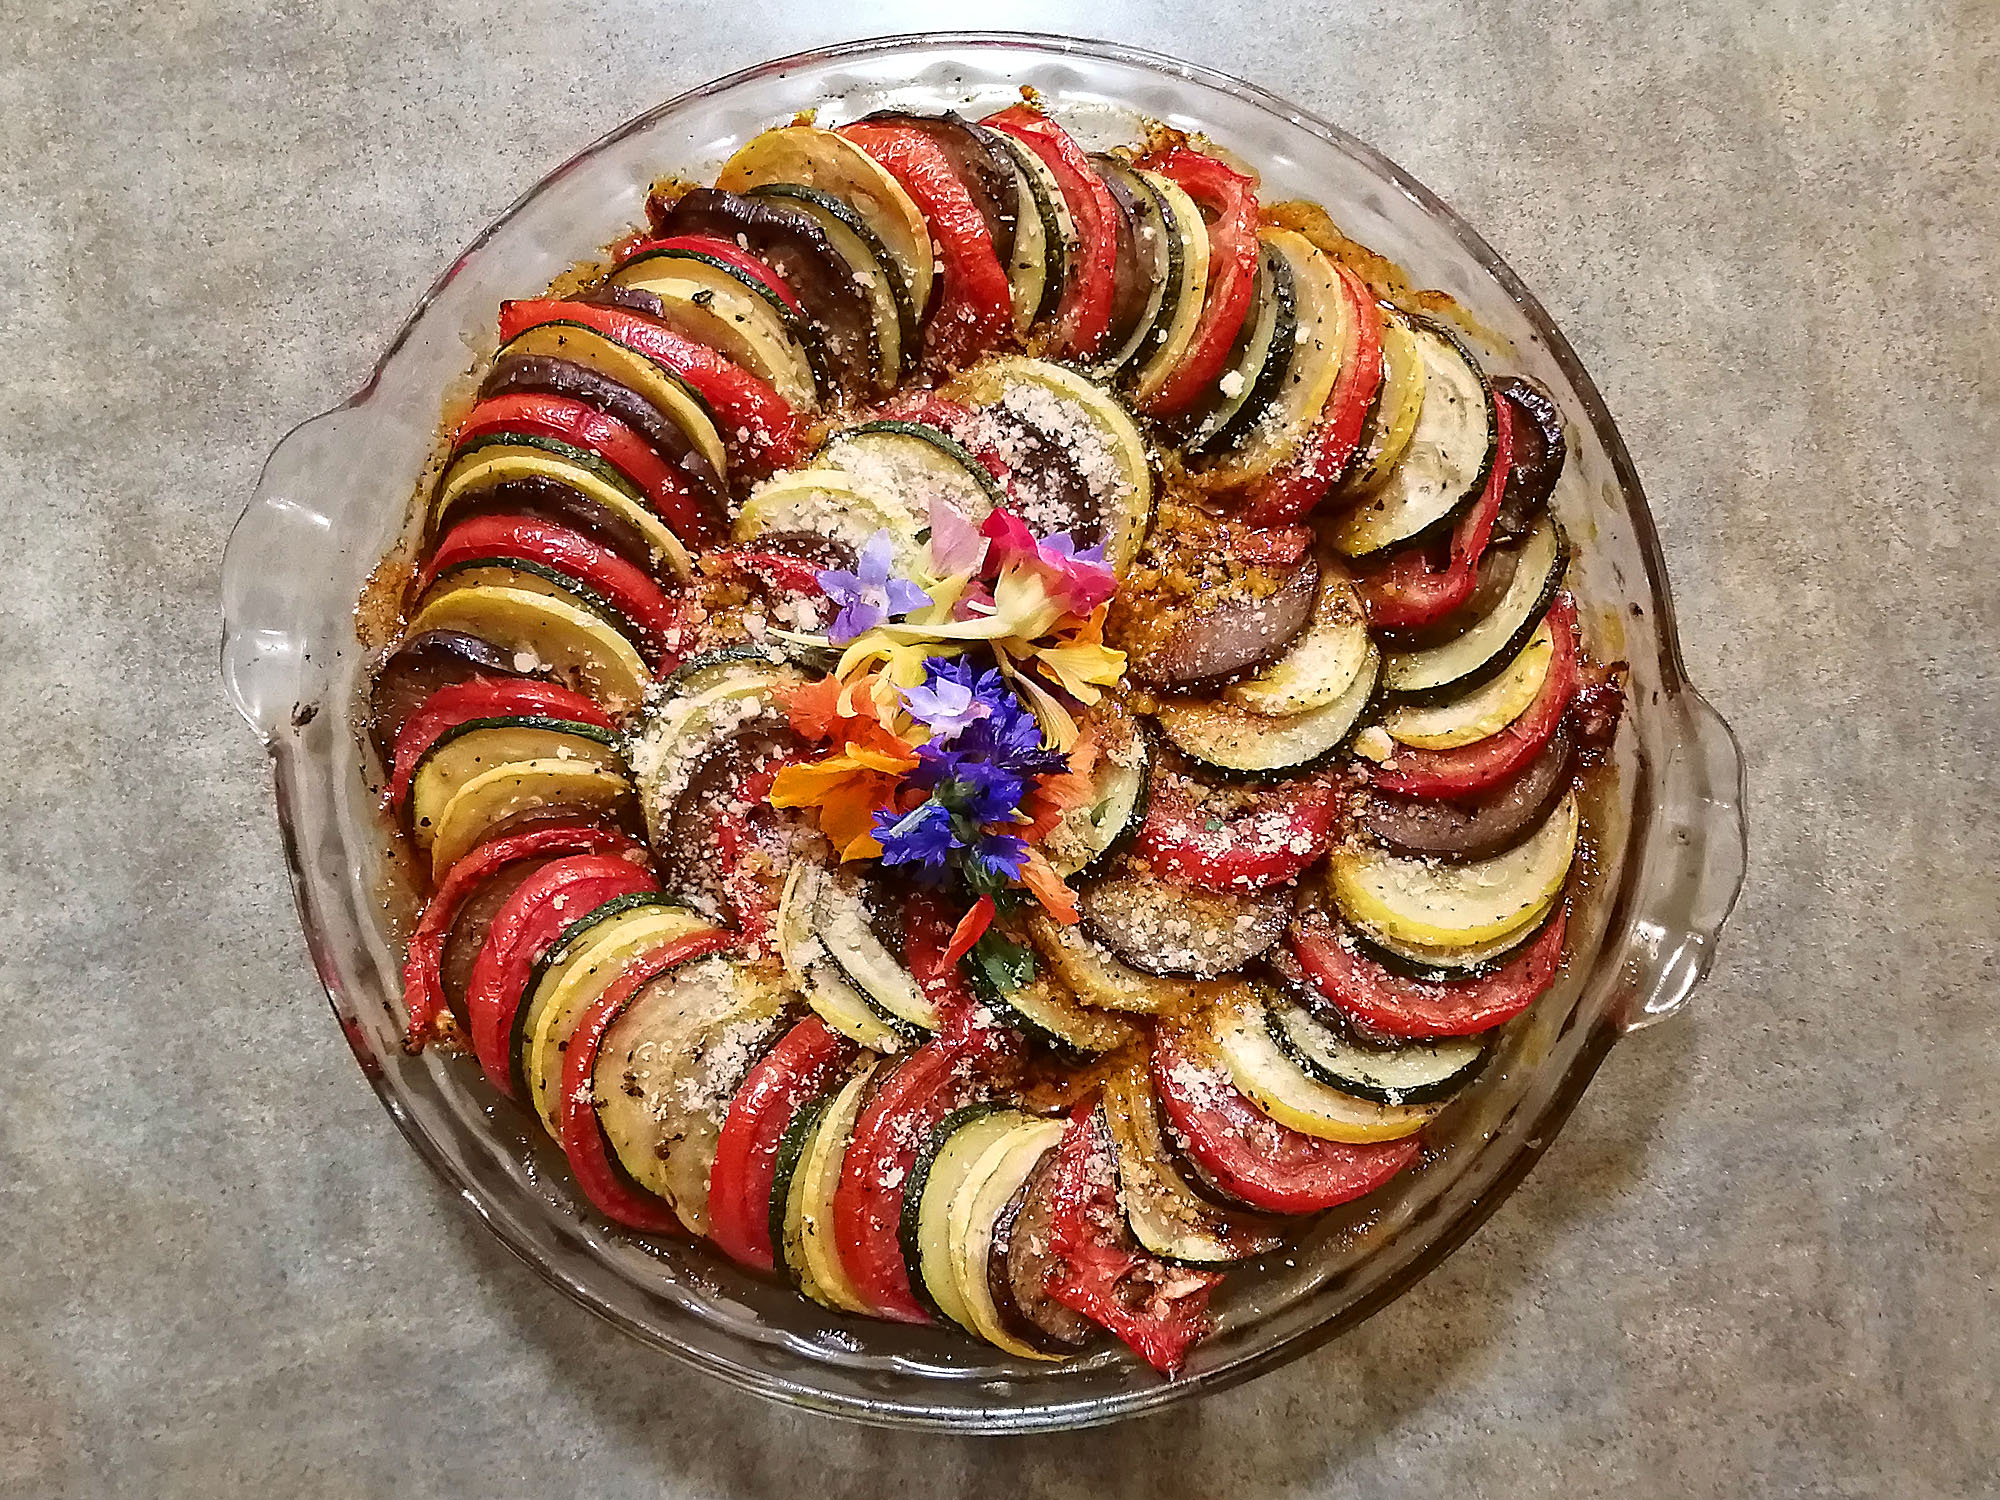 A round baking dish with an arrangement of grilled vegetable slices in many colors garnished with some edible flowers. Photo by Paul Young.